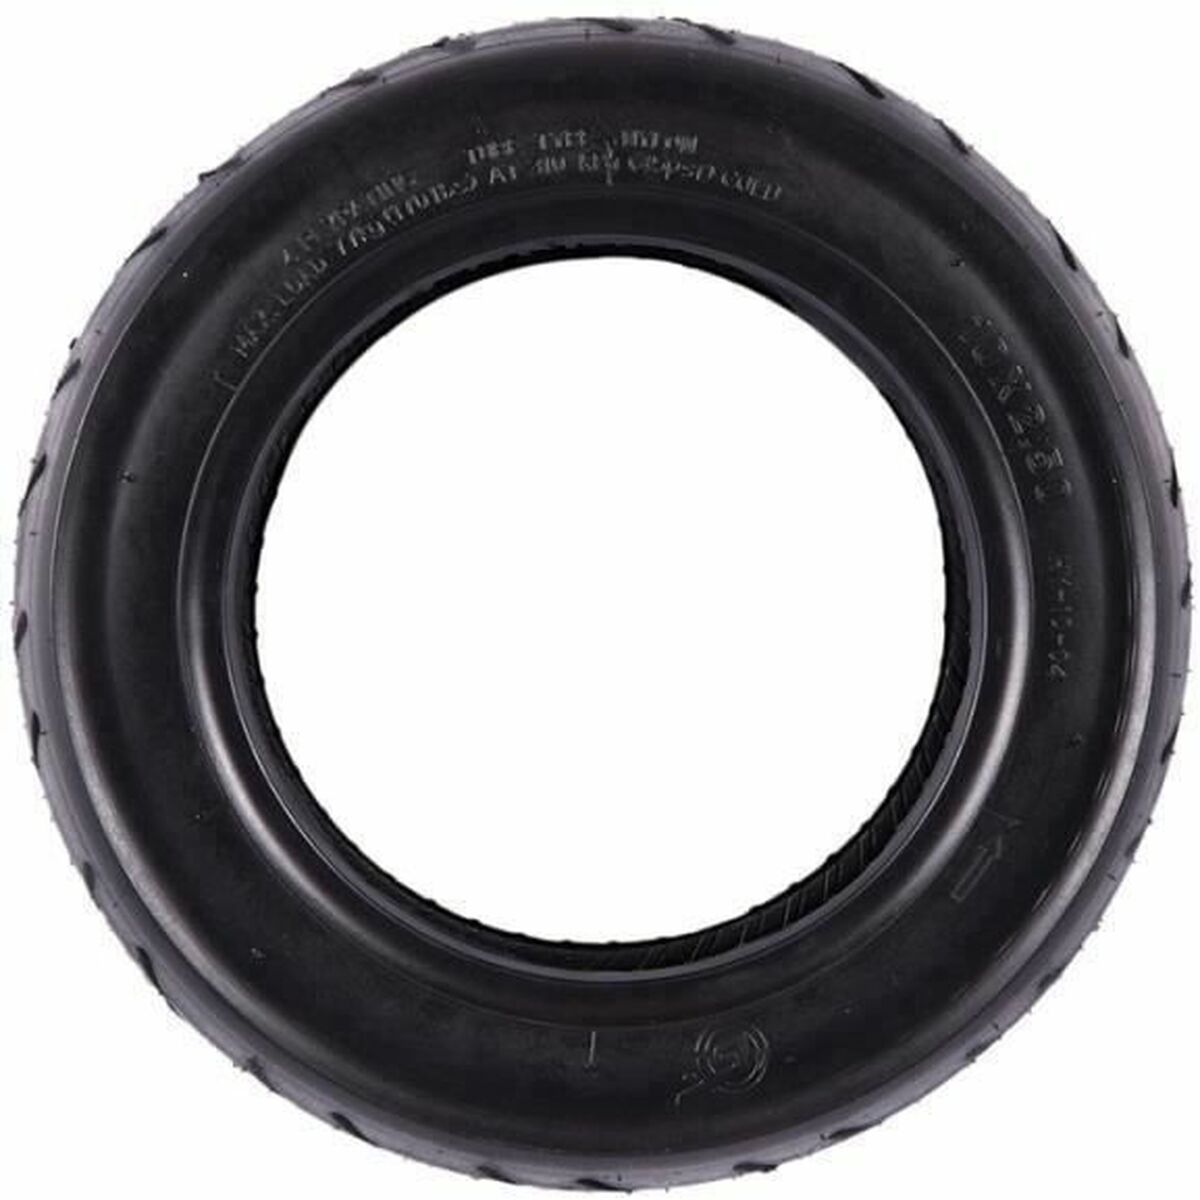 Electric scooter tire Wispeed 10"